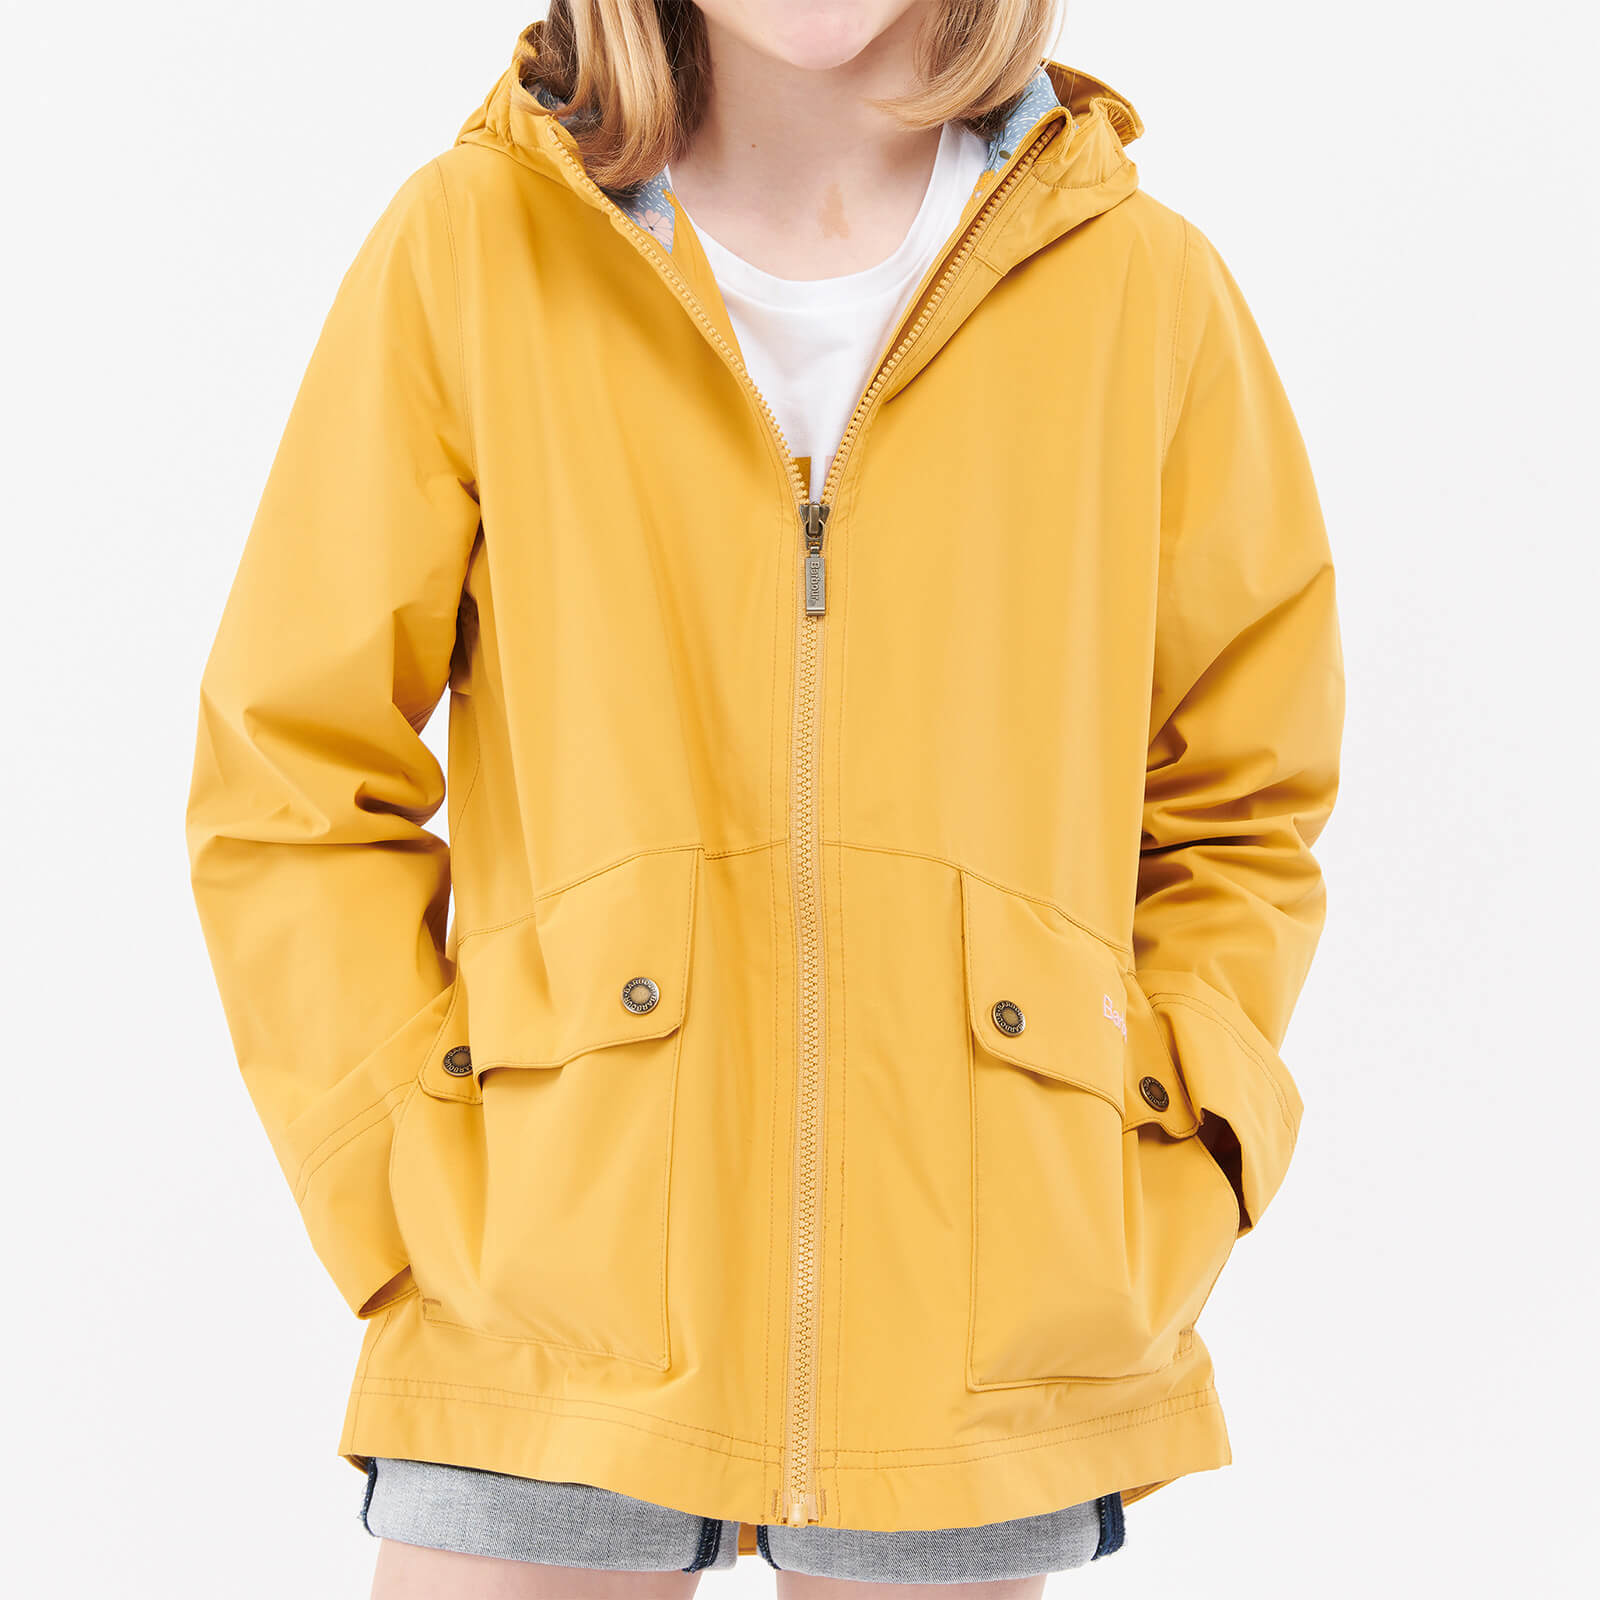 Barbour Girls' Armeria Jacket - Mustard/Folky Floral -  6-7 Years